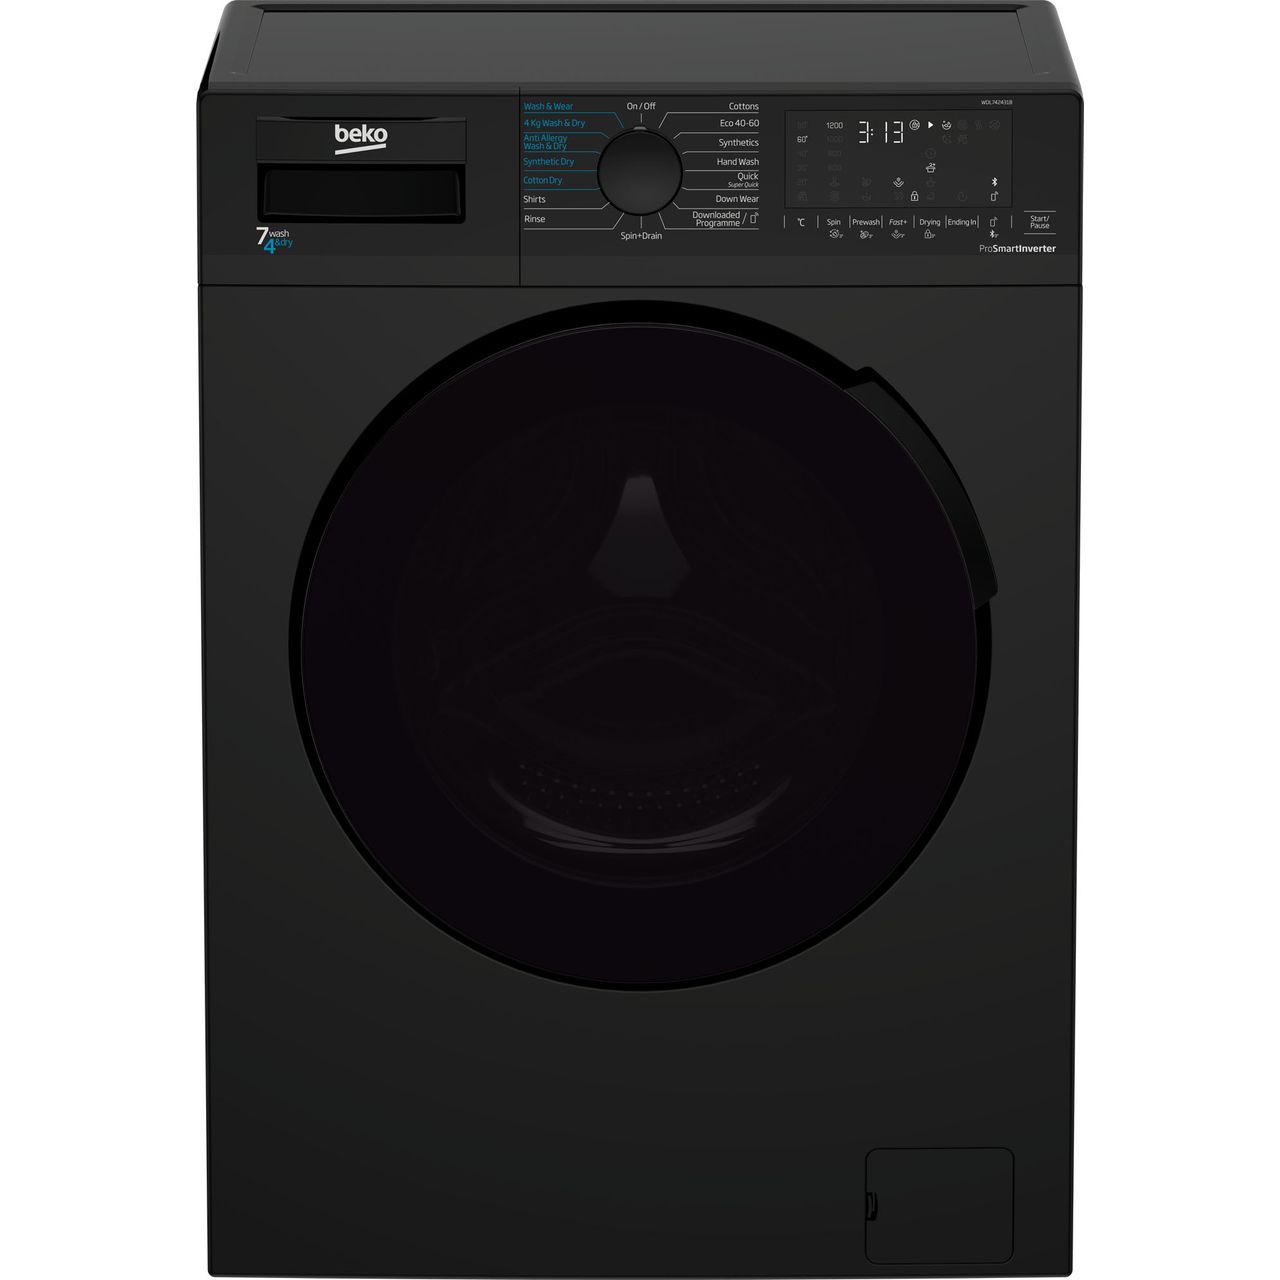 Beko WDL742431B 7Kg / 4Kg Washer Dryer with 1200 rpm Review